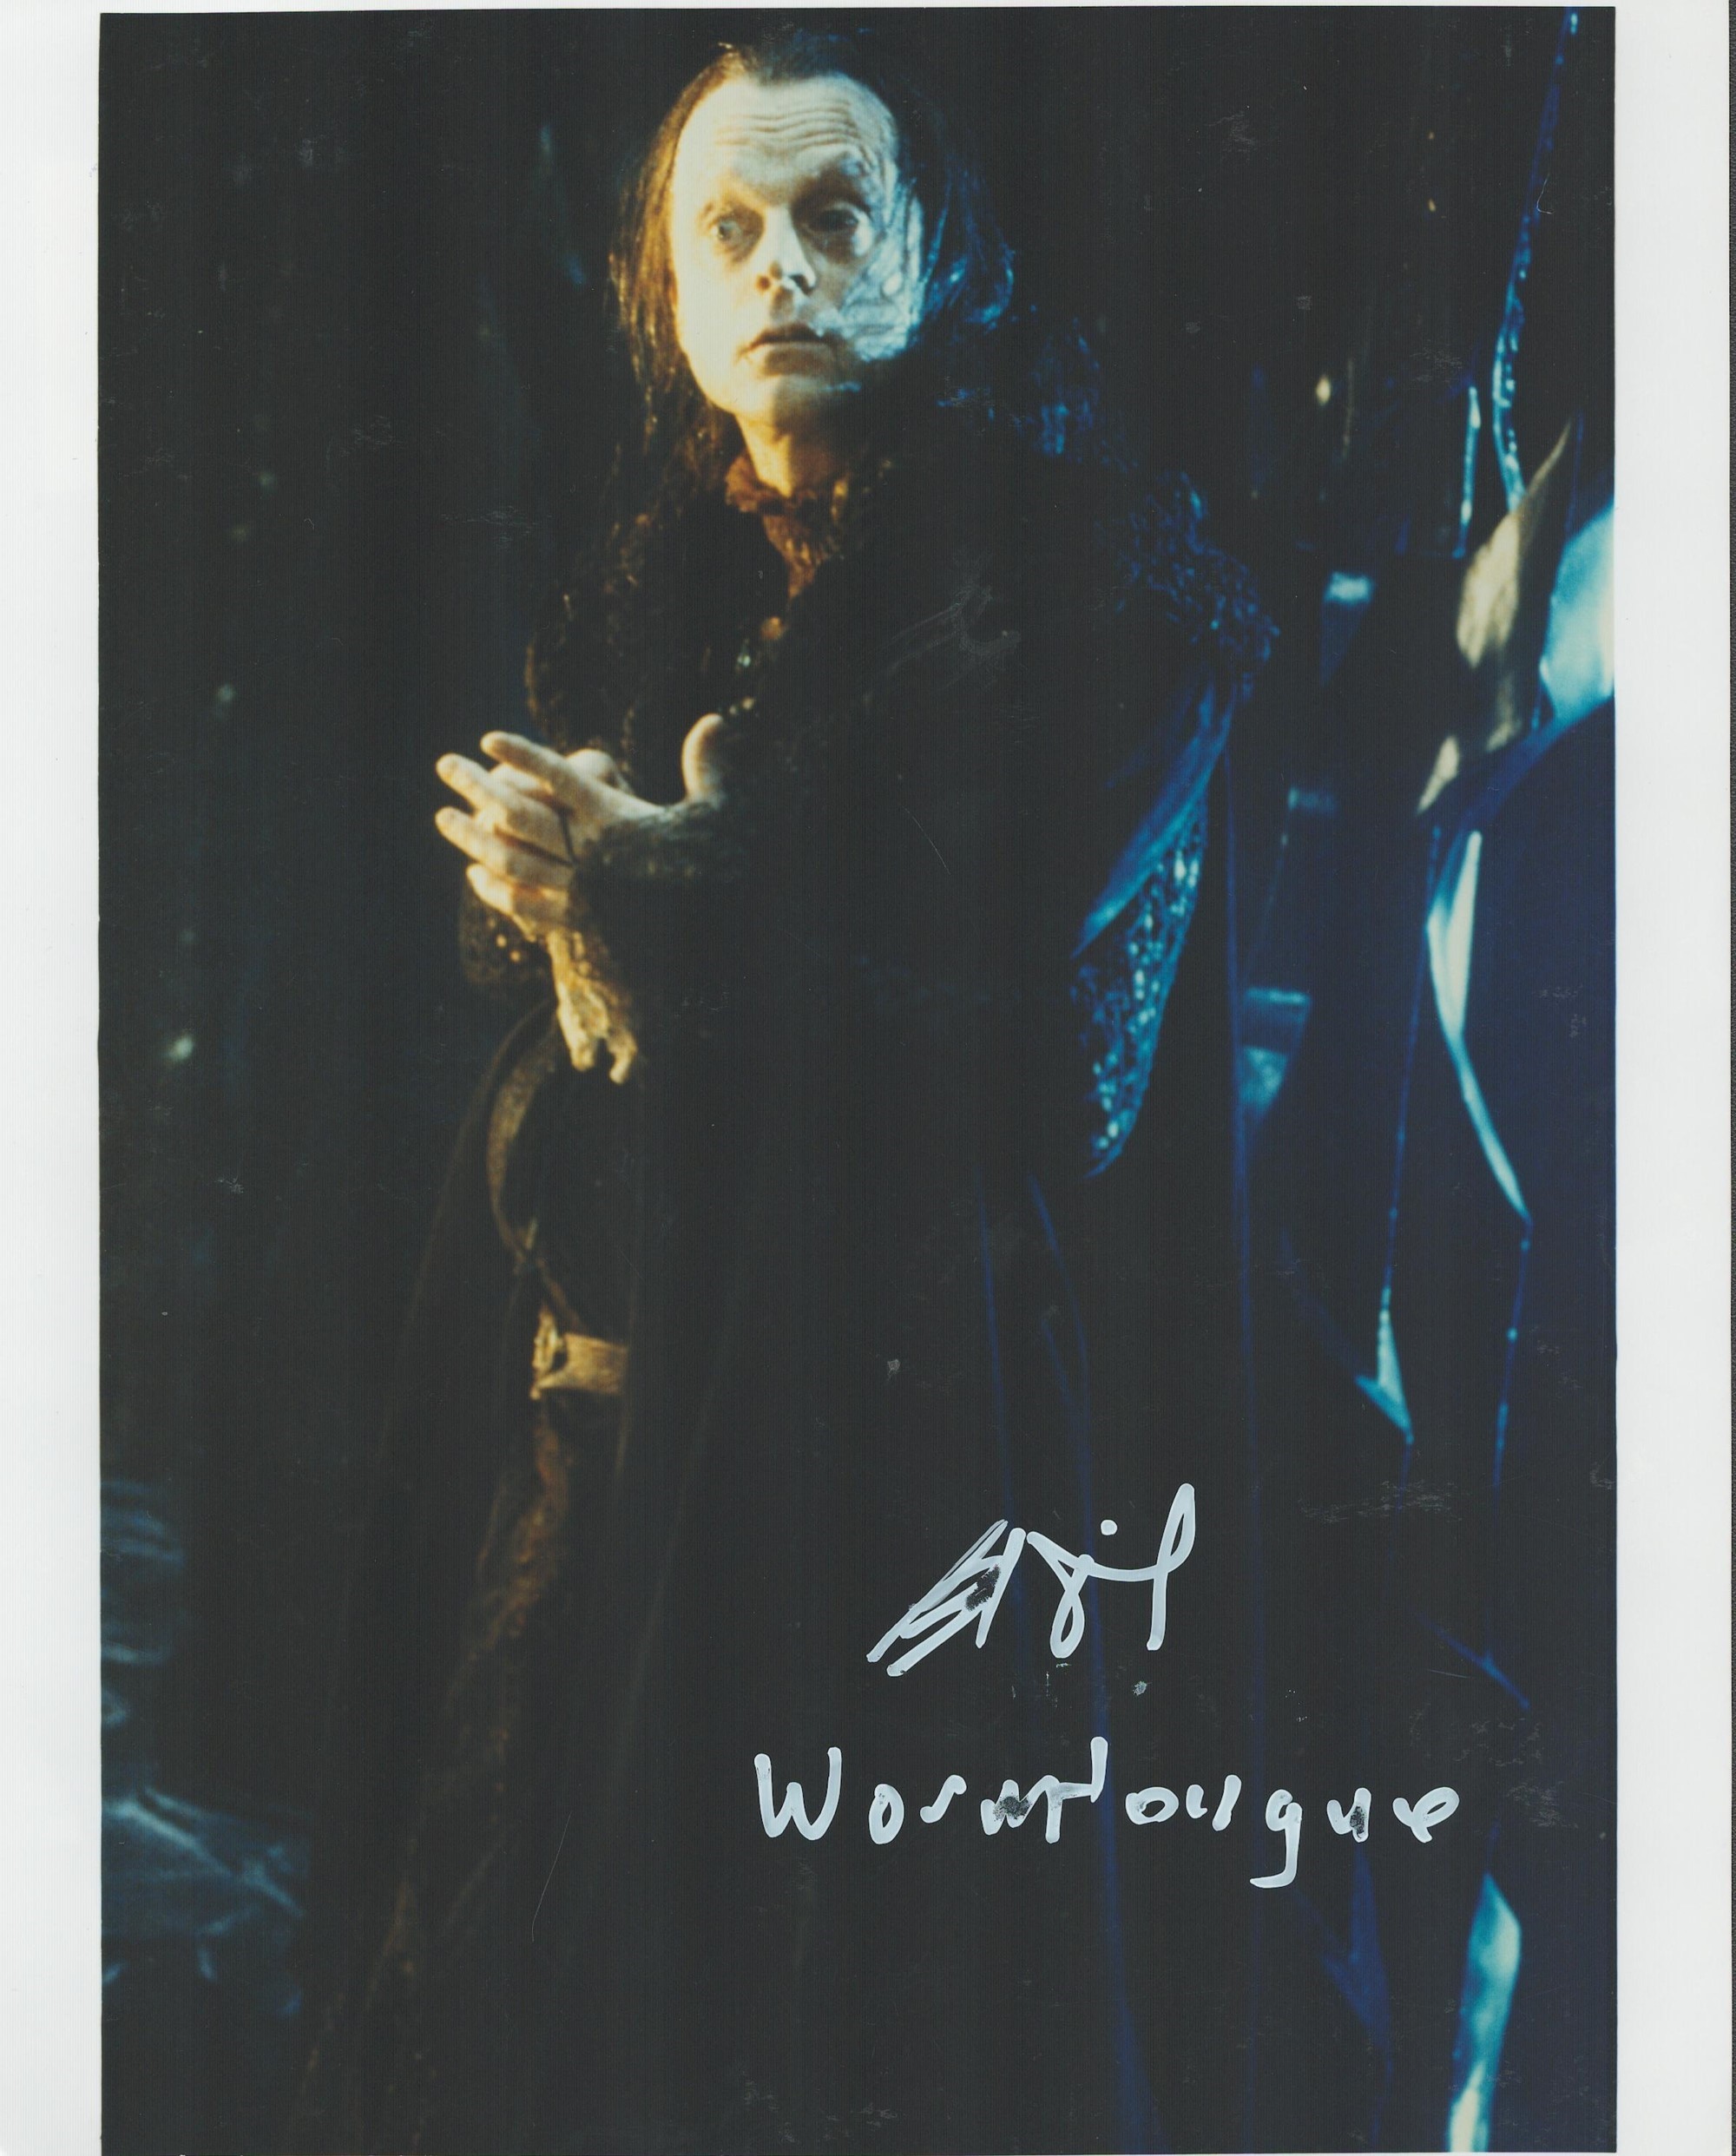 Lord Of The Rings Actor, Brad Dourif signed 10x8 colour photograph. Dourif (born March 18, 1950)